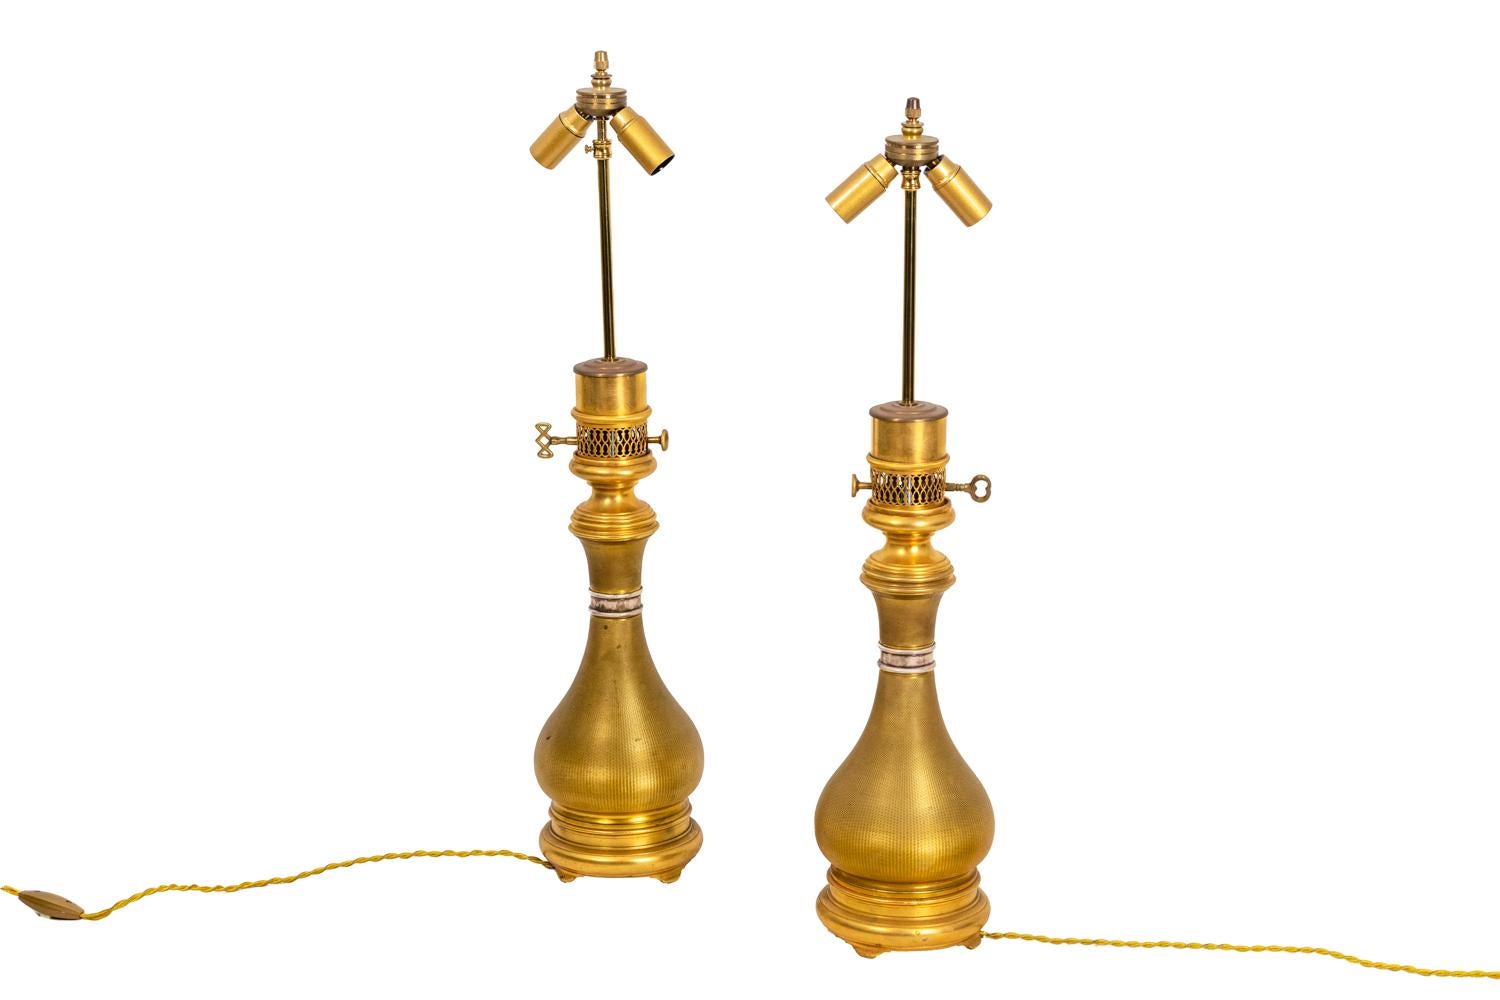 Maison Gagneau, signed.
Pair of baluster shape lamps in guilloche gilt brass. They stand on a circular base. The collar is circled with a silvered ring.

Stamped “Gagneau, 115 R. Lafayette” on the openwork beak.

Work realized in the late 19th